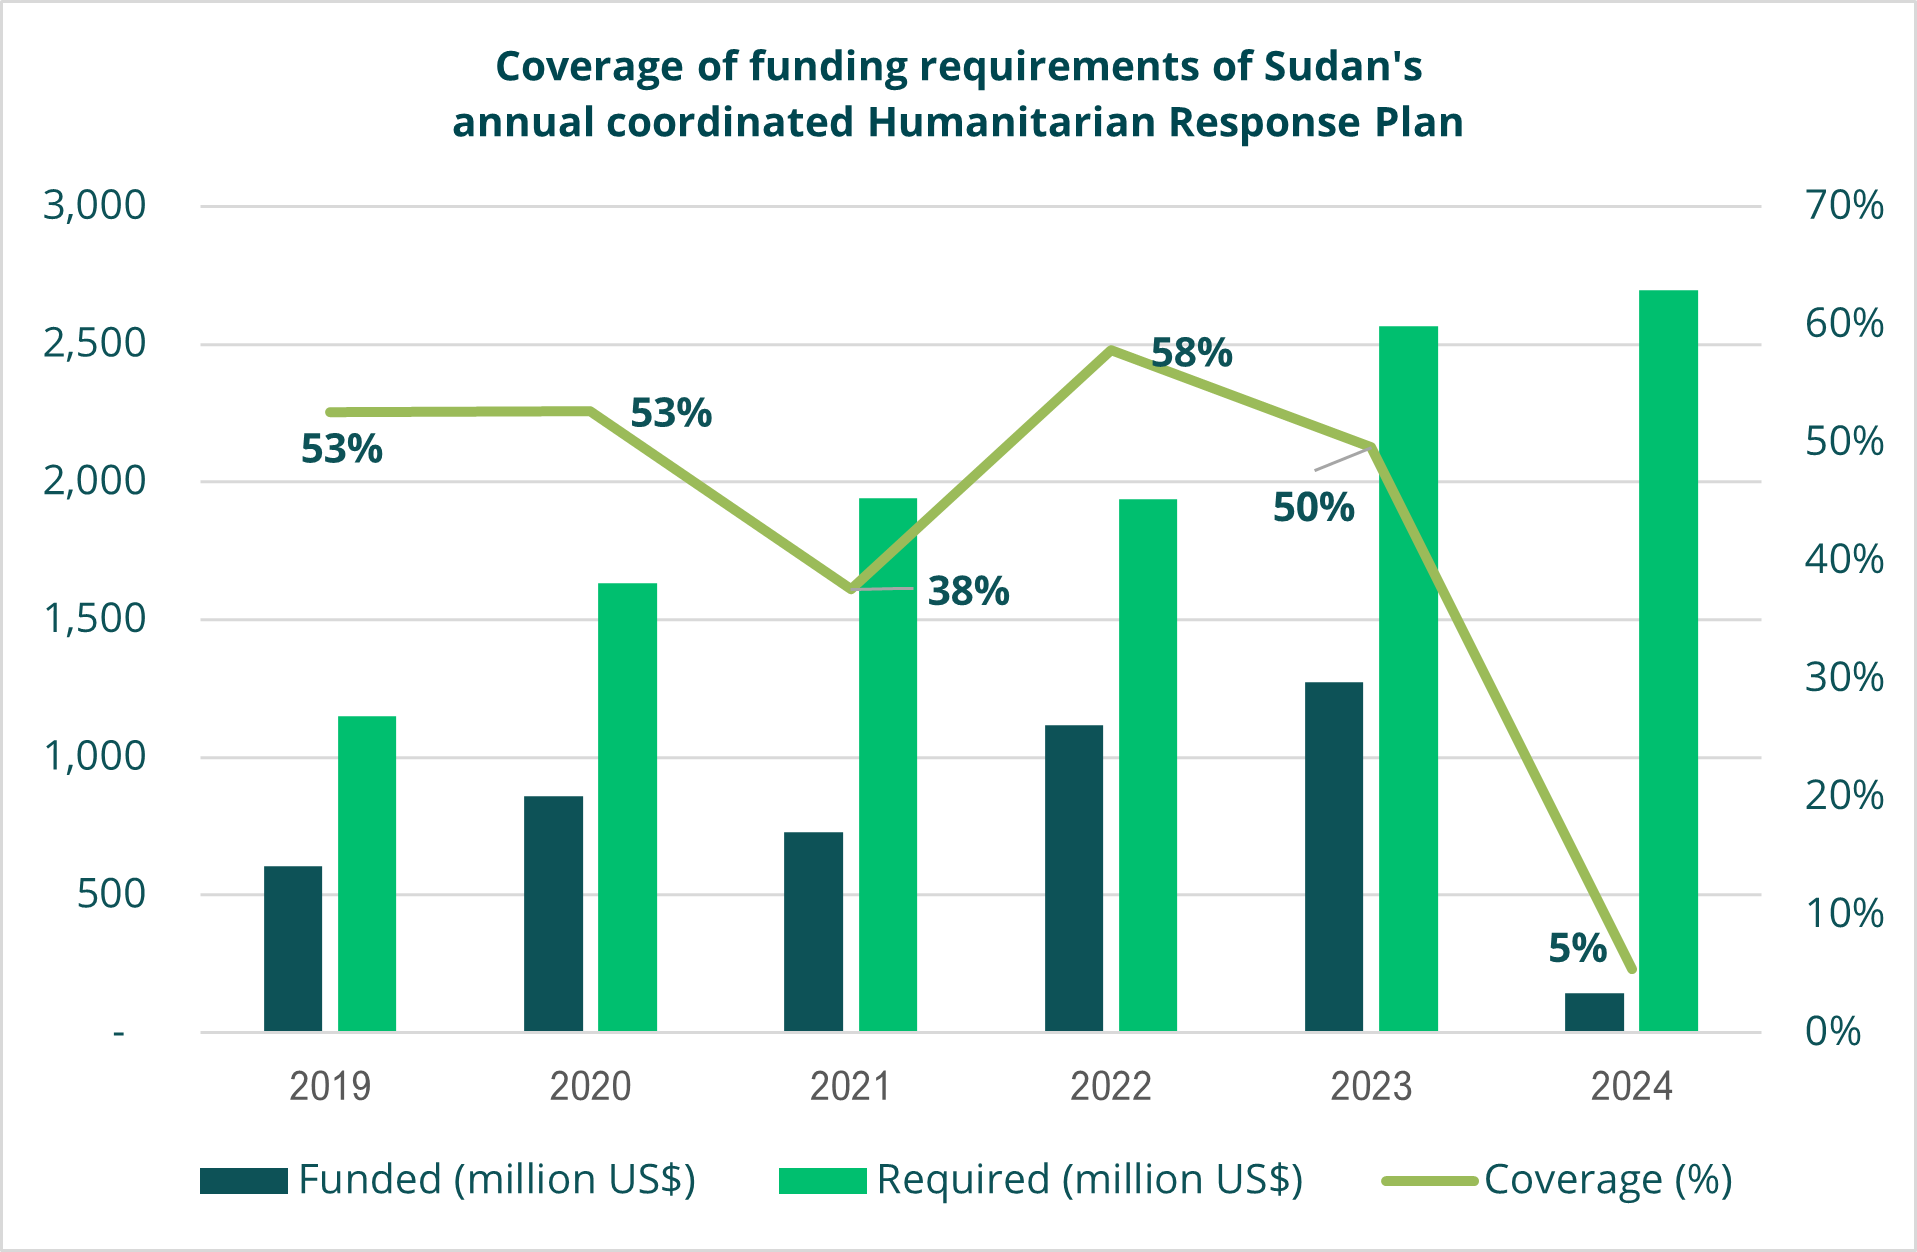 Graph showing the coverage of funding requirements for Sudan's humanitarian response plan. 